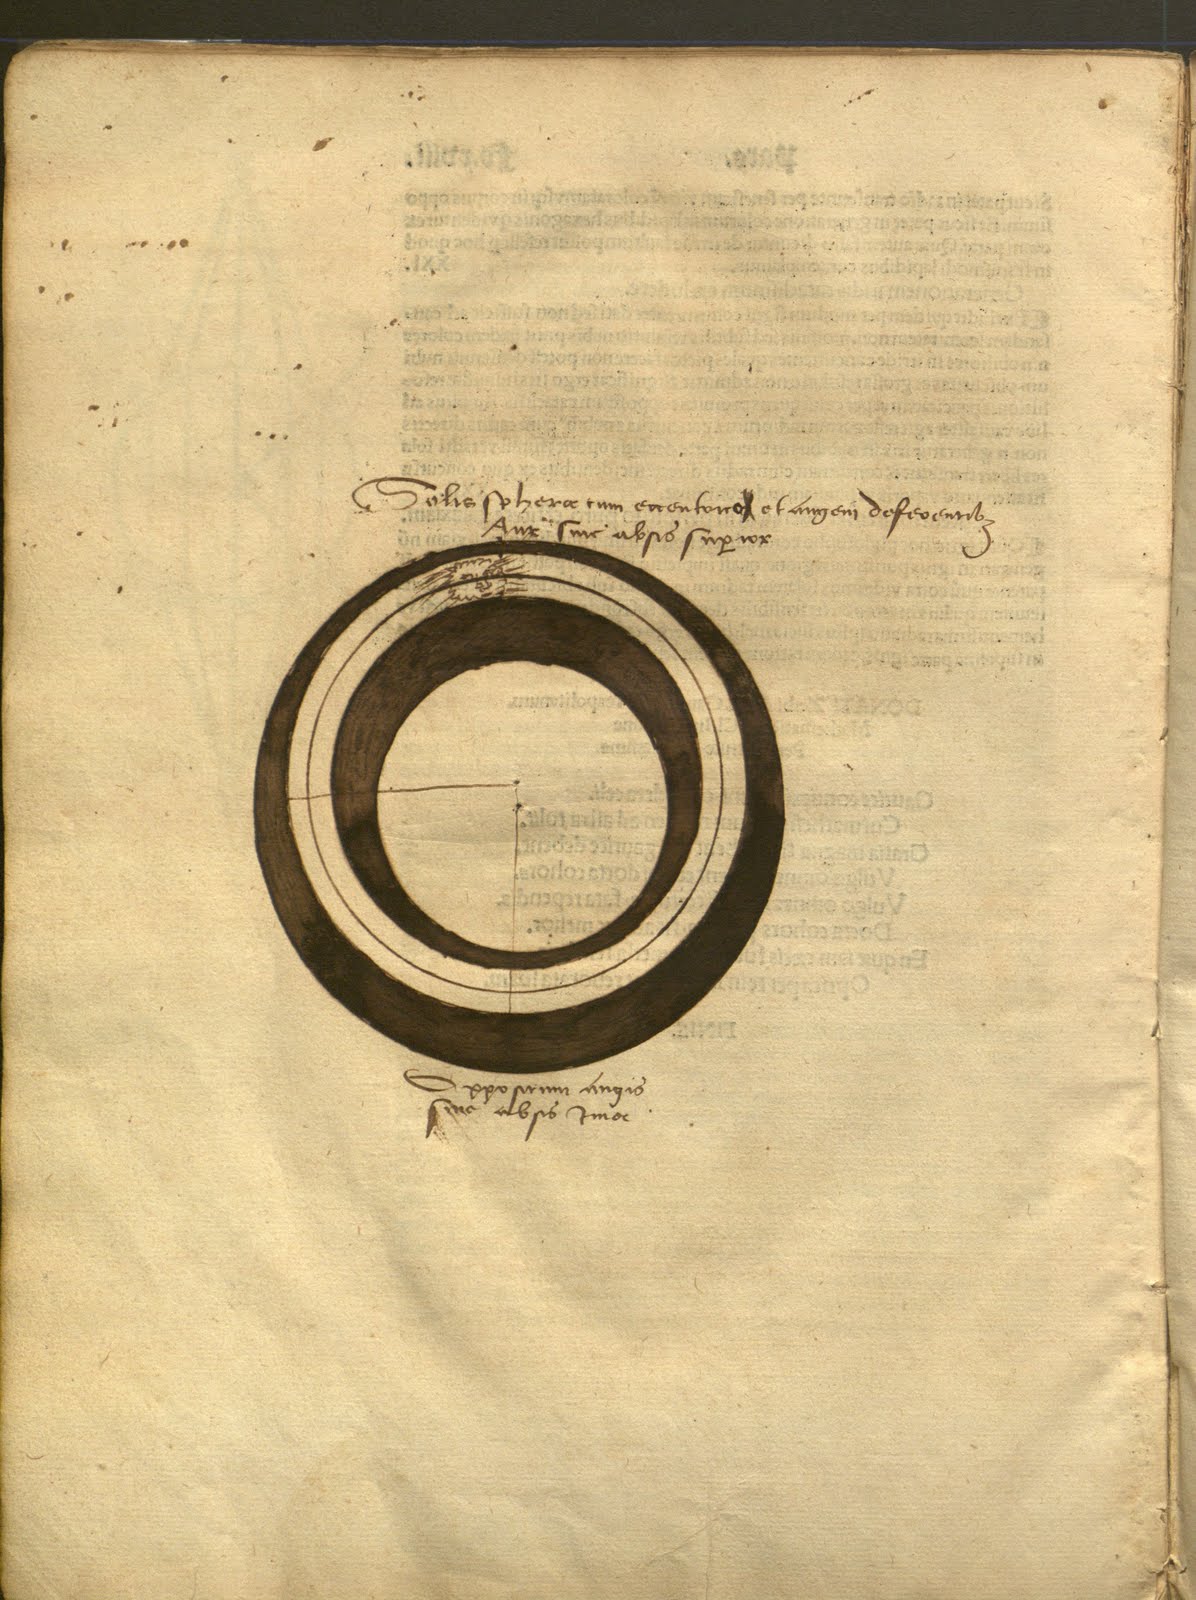 Astronomical diagram, likely drawn with the aid of a compass.